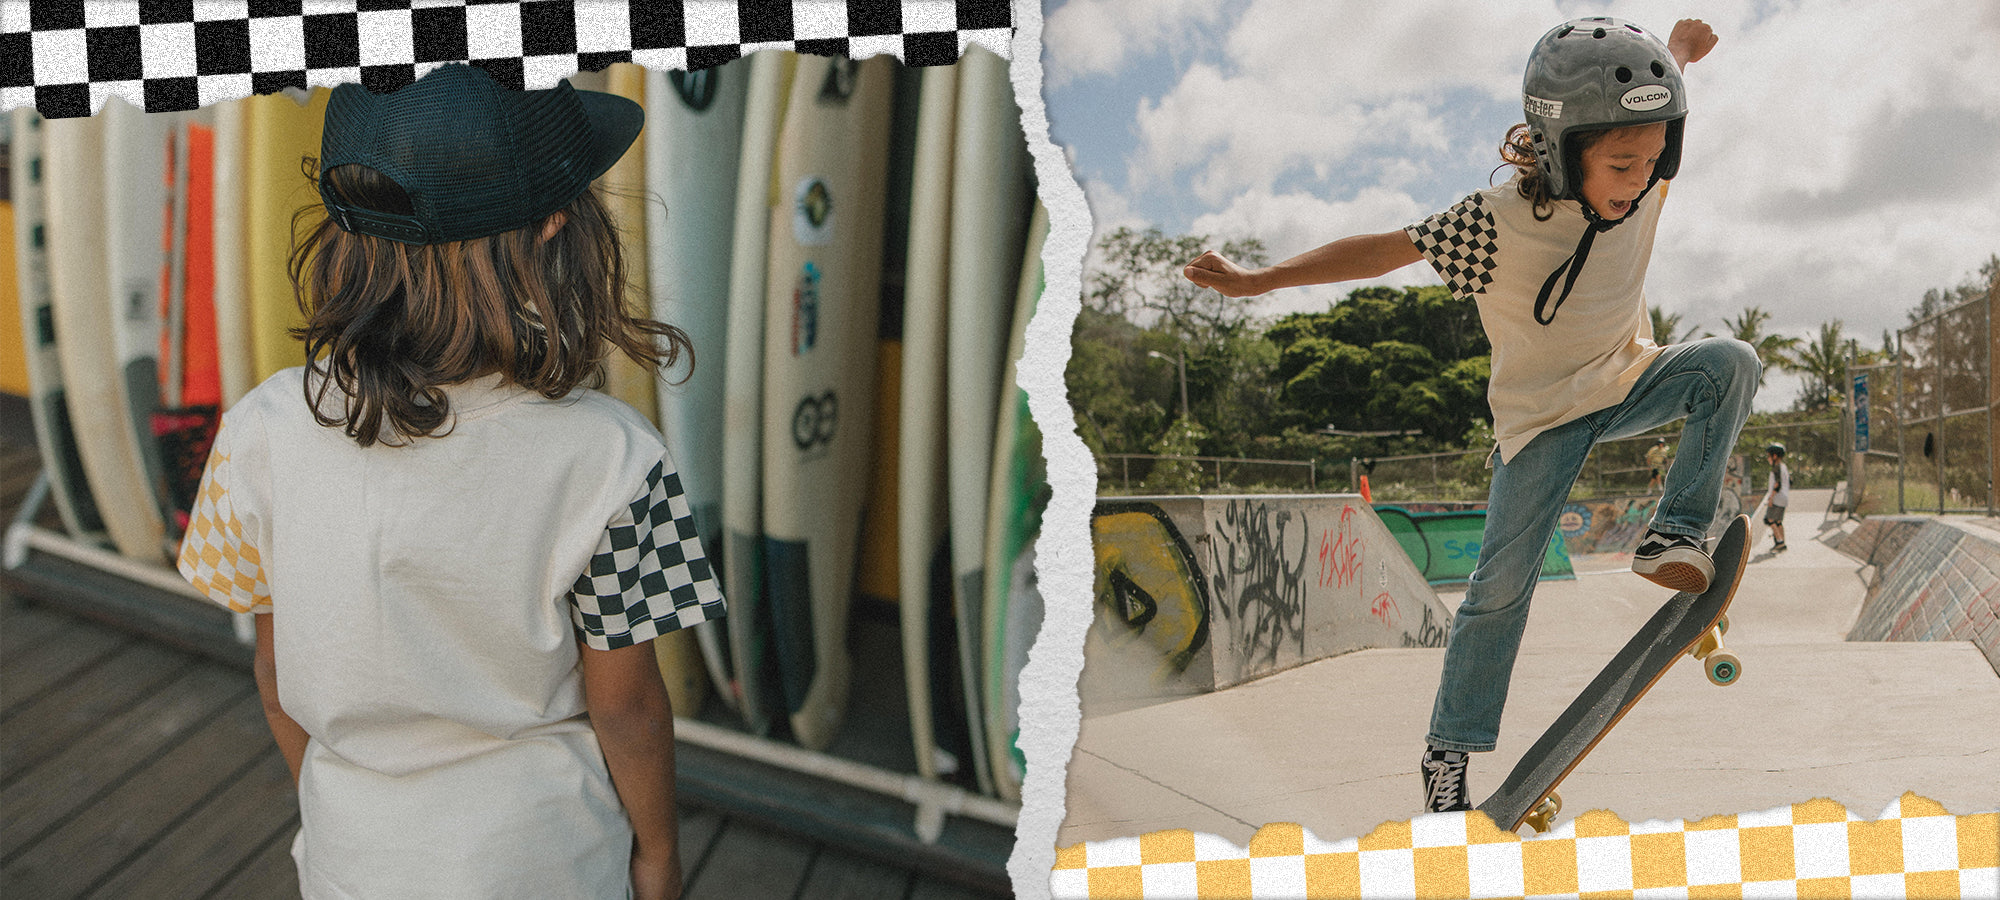 Salty Little Bums, Checker Sleeves, Checked Out, Surf Style, Skate Life, Coastal Kids Brand